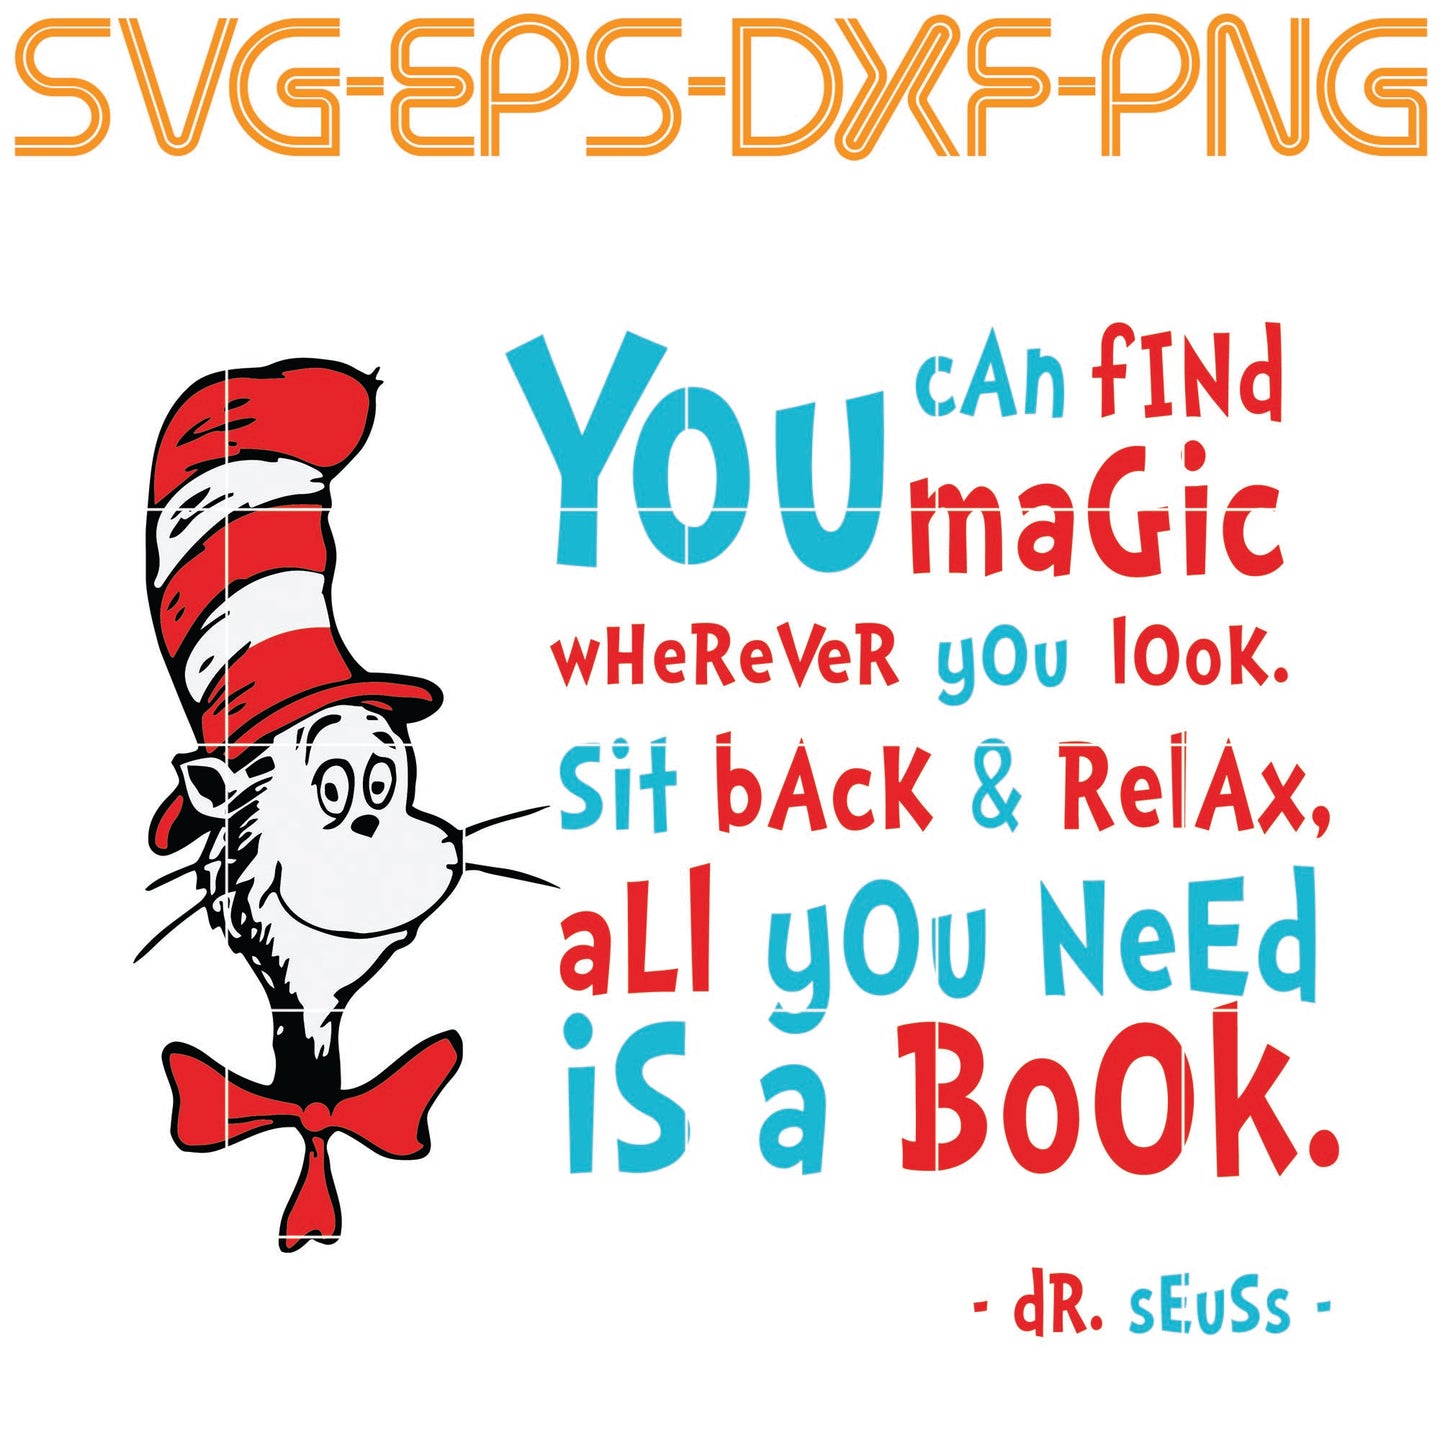 Dr Seuss Dr Seuss Svg You Can Find Magic Cat In The Hat Cat Svg Sumosvg